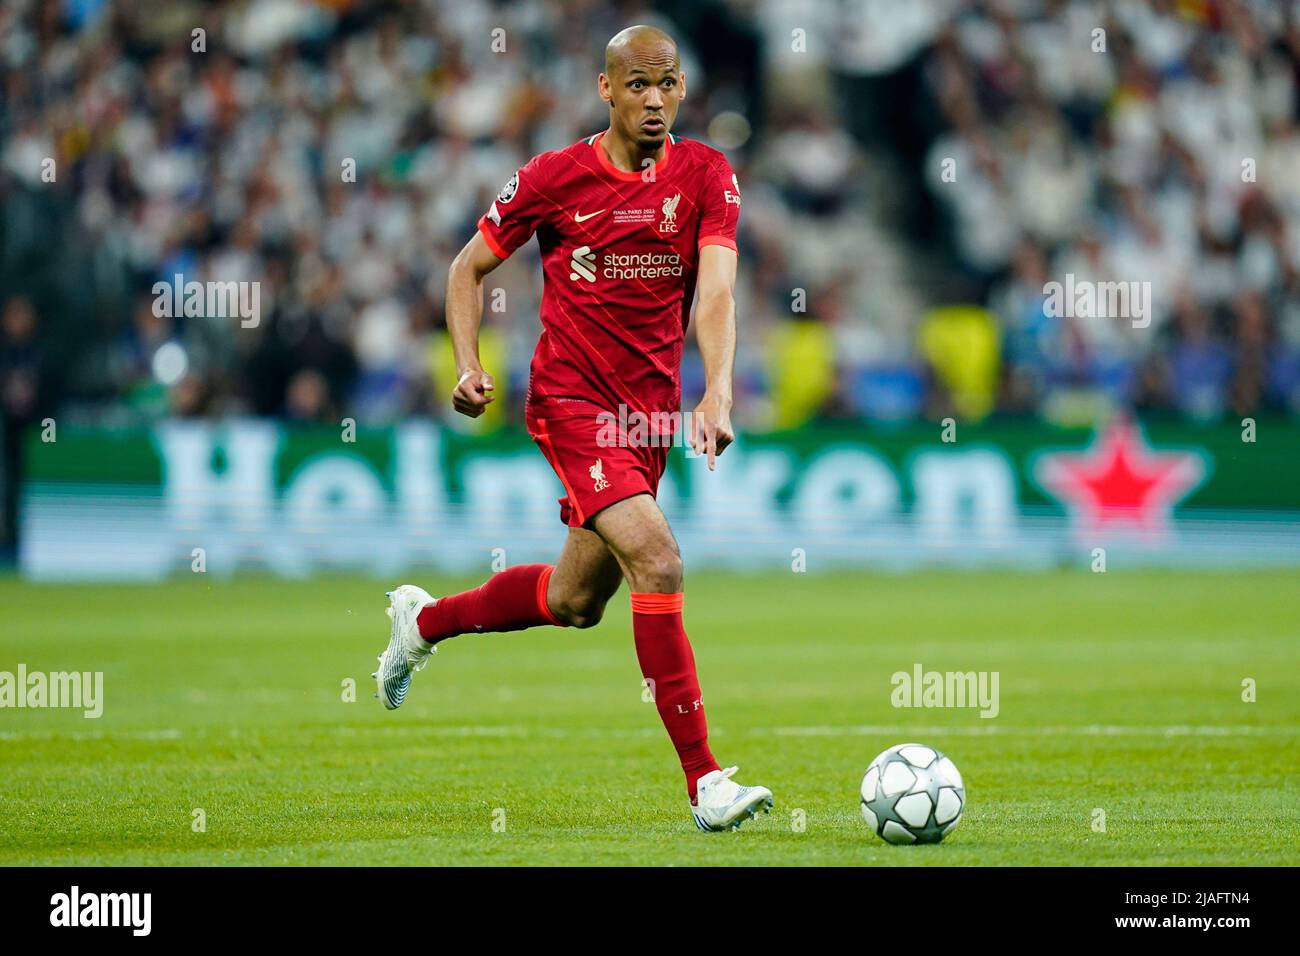 Fabinho of Liverpool FC during the UEFA Champions League Final match between Liverpool FC and Real Madrid played at Stade de France on May 28, 2022 in Paris, France. (Photo / Magma) Stock Photo